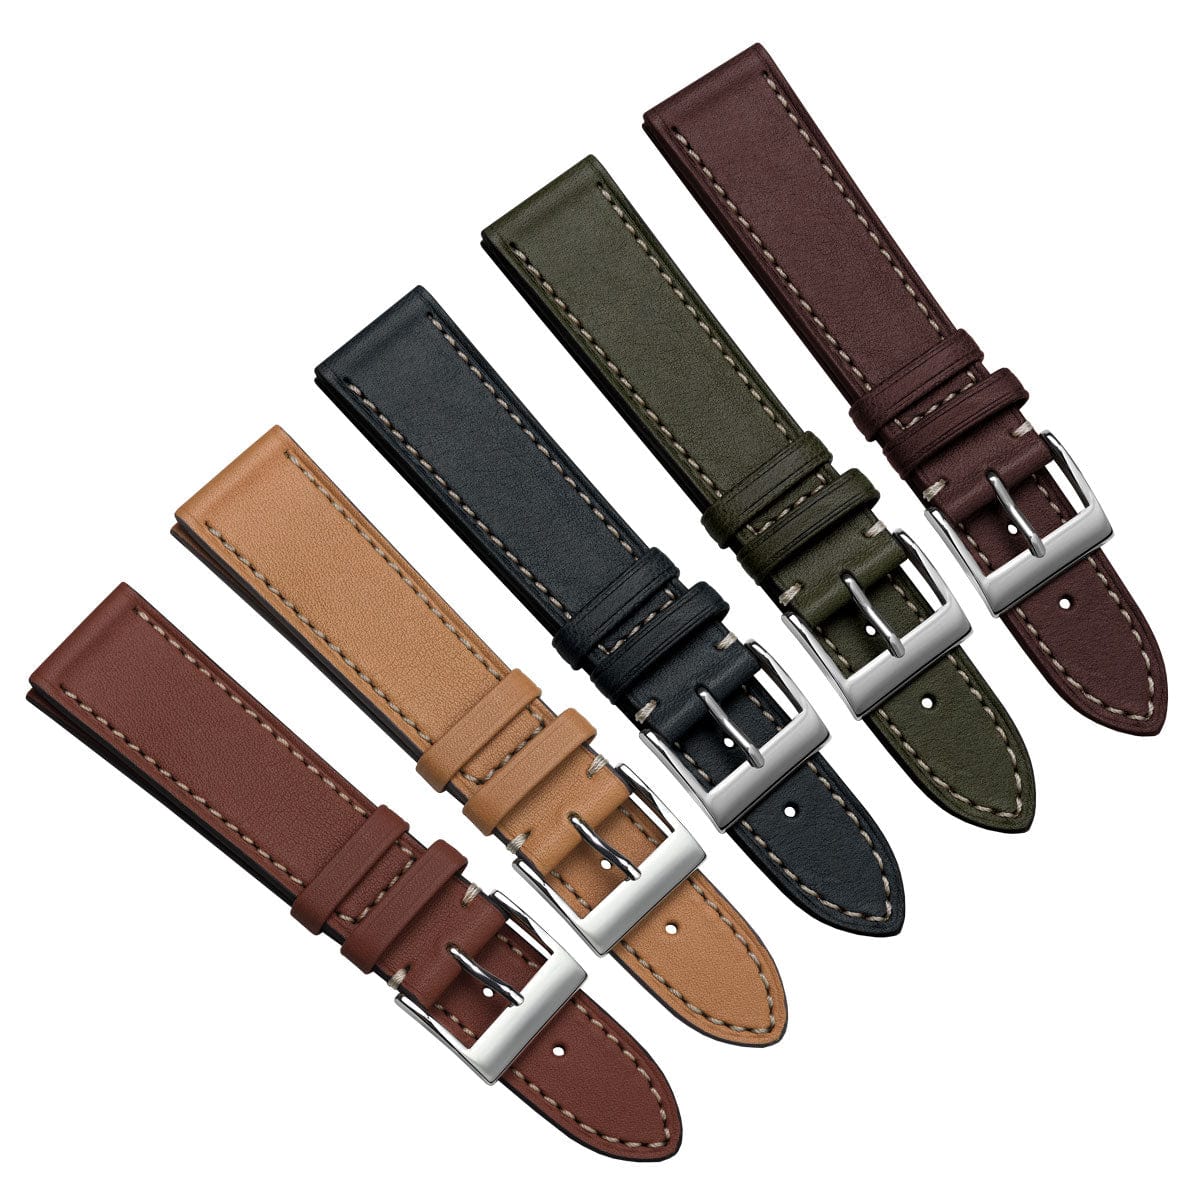 Ostend Baranil Flat Leather Watch Strap - Chocolate Brown